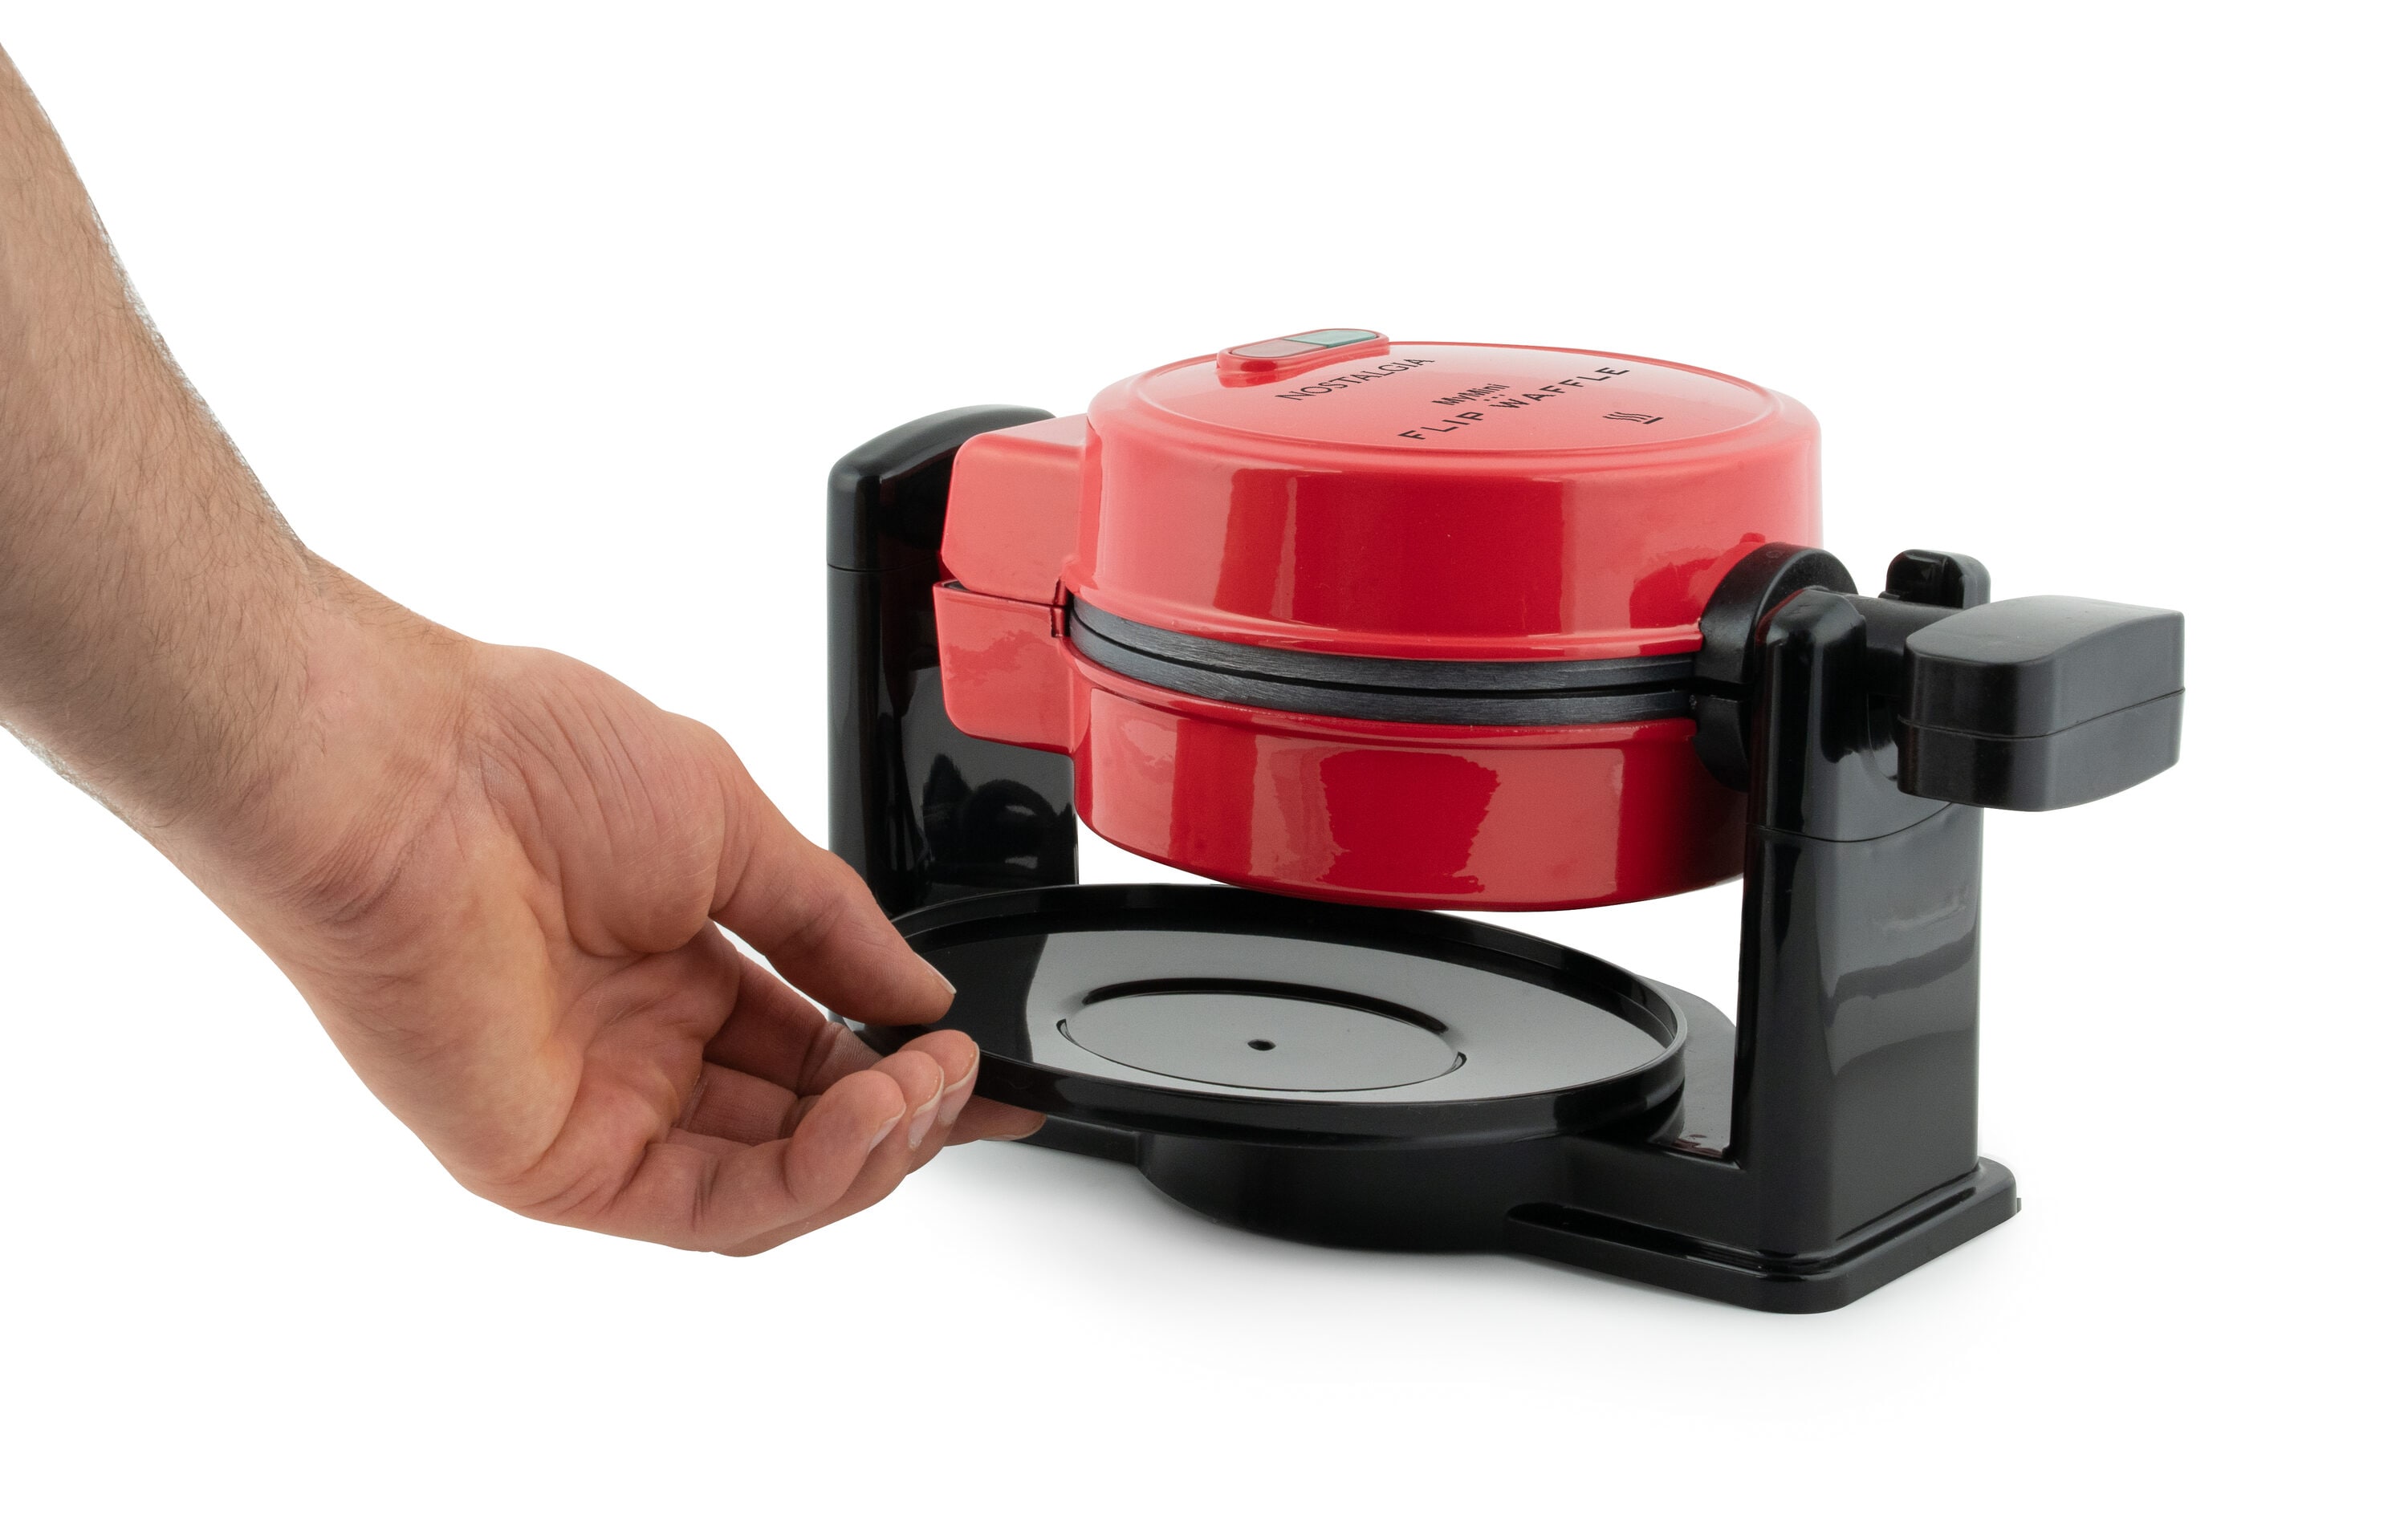 Nostalgia MyMini Personal Waffle Maker Red Compact 5 Non Stick Surface NEW